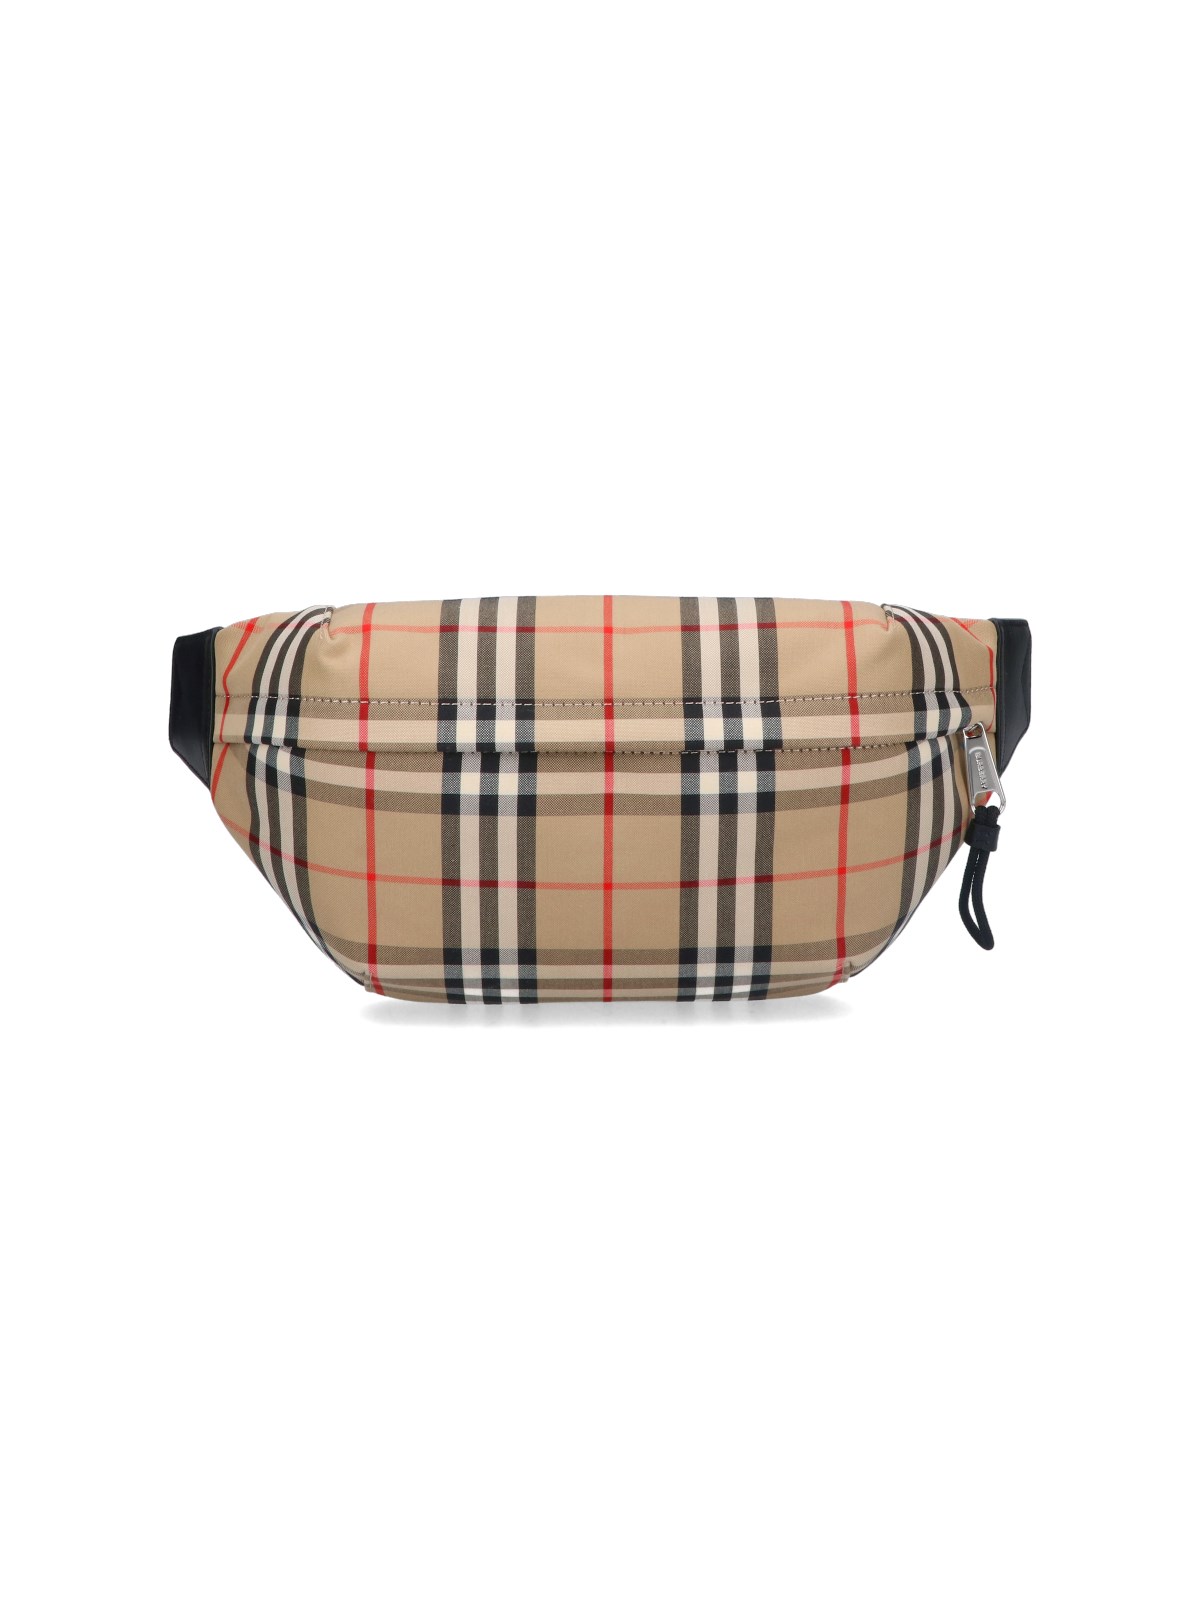 Burberry - "vintage Check" Fannypack In Beige